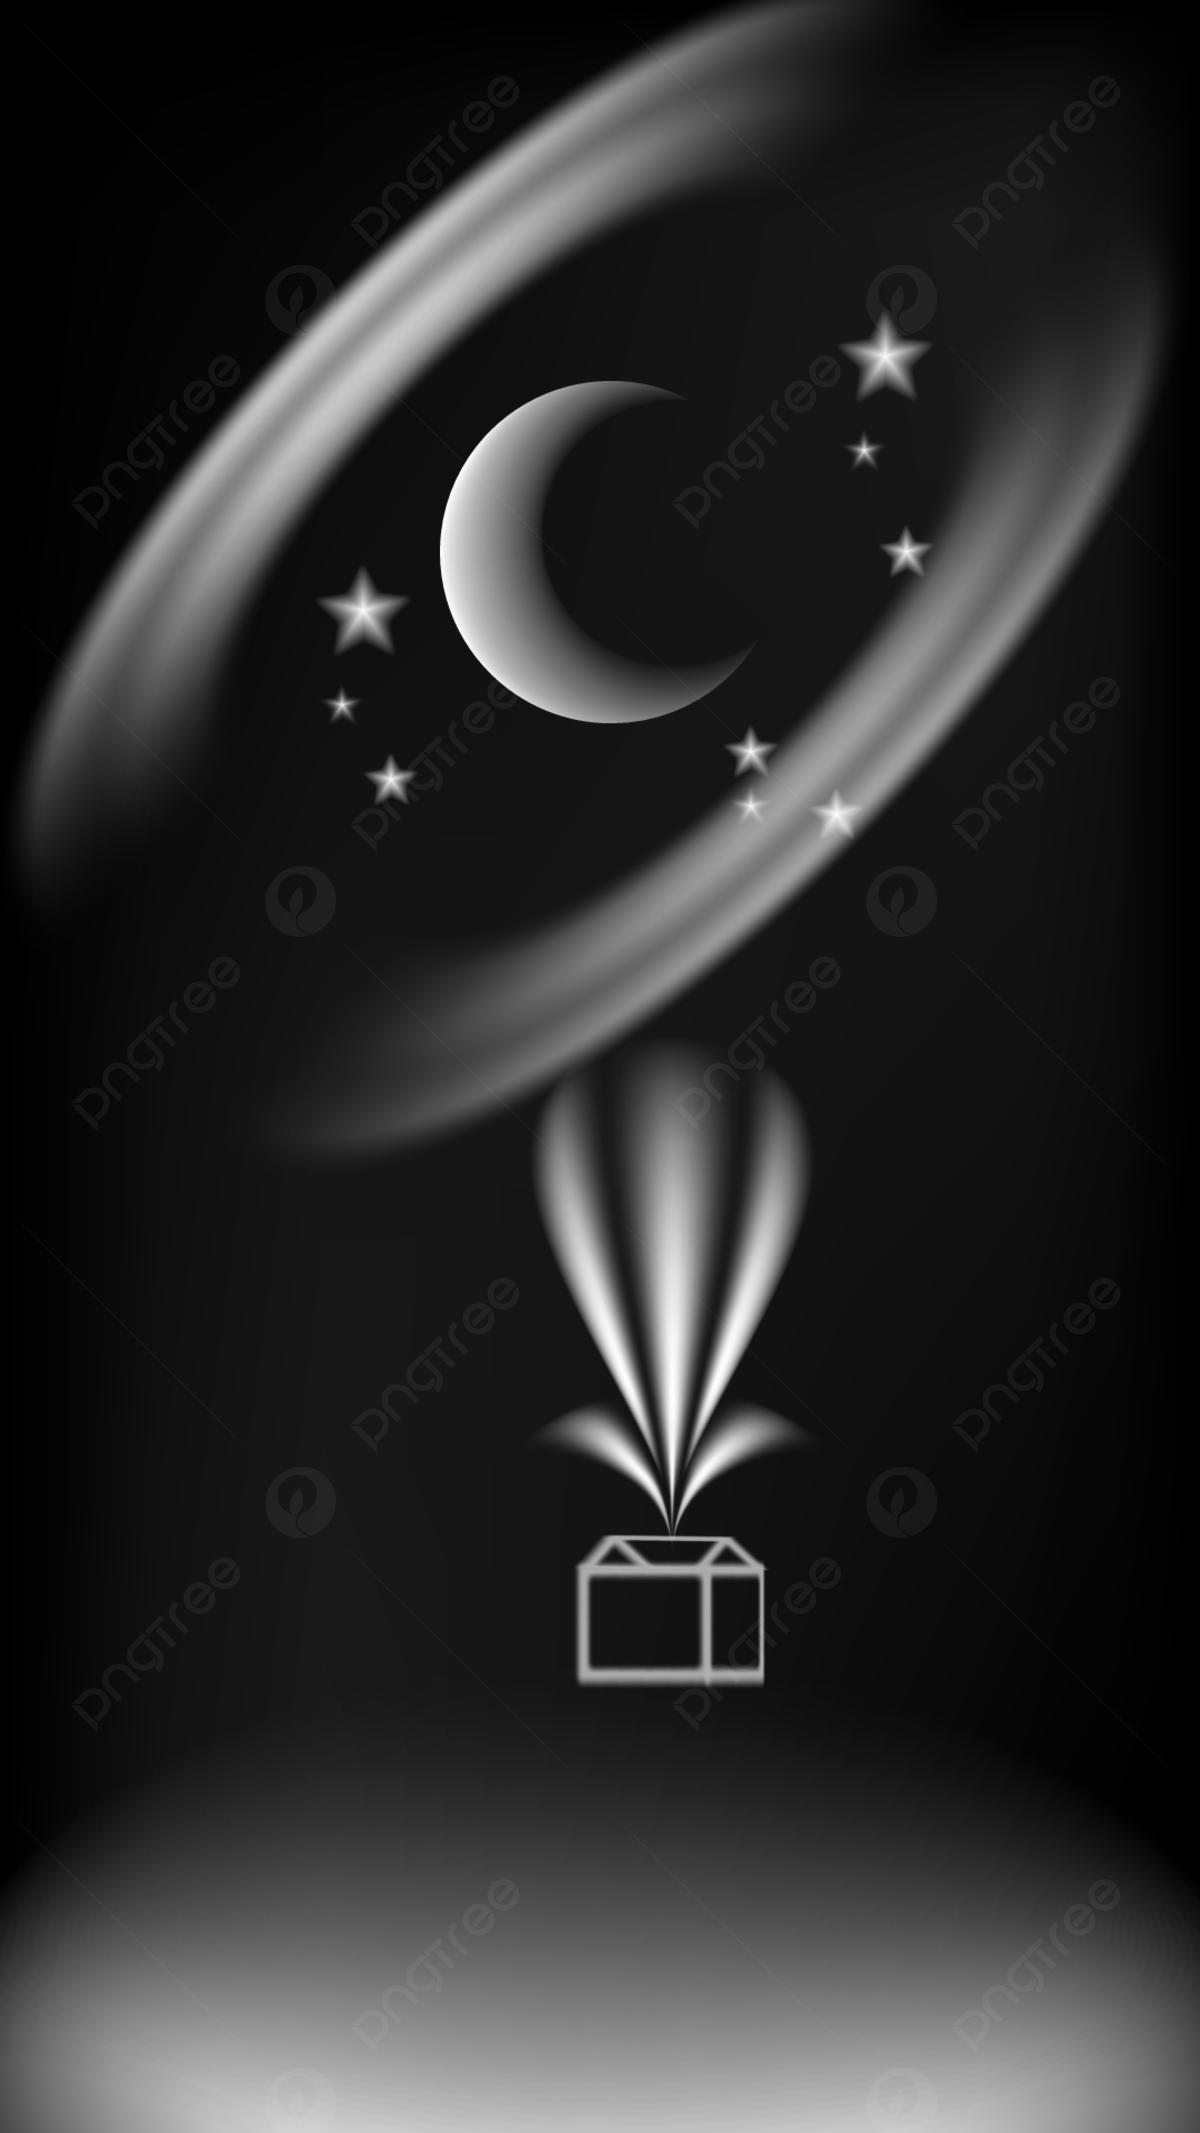 Aesthetic Moon Black And White Wallpaper Background, Aesthetic Wallpaper, Aesthetic Moon, Stars Background Image for Free Download